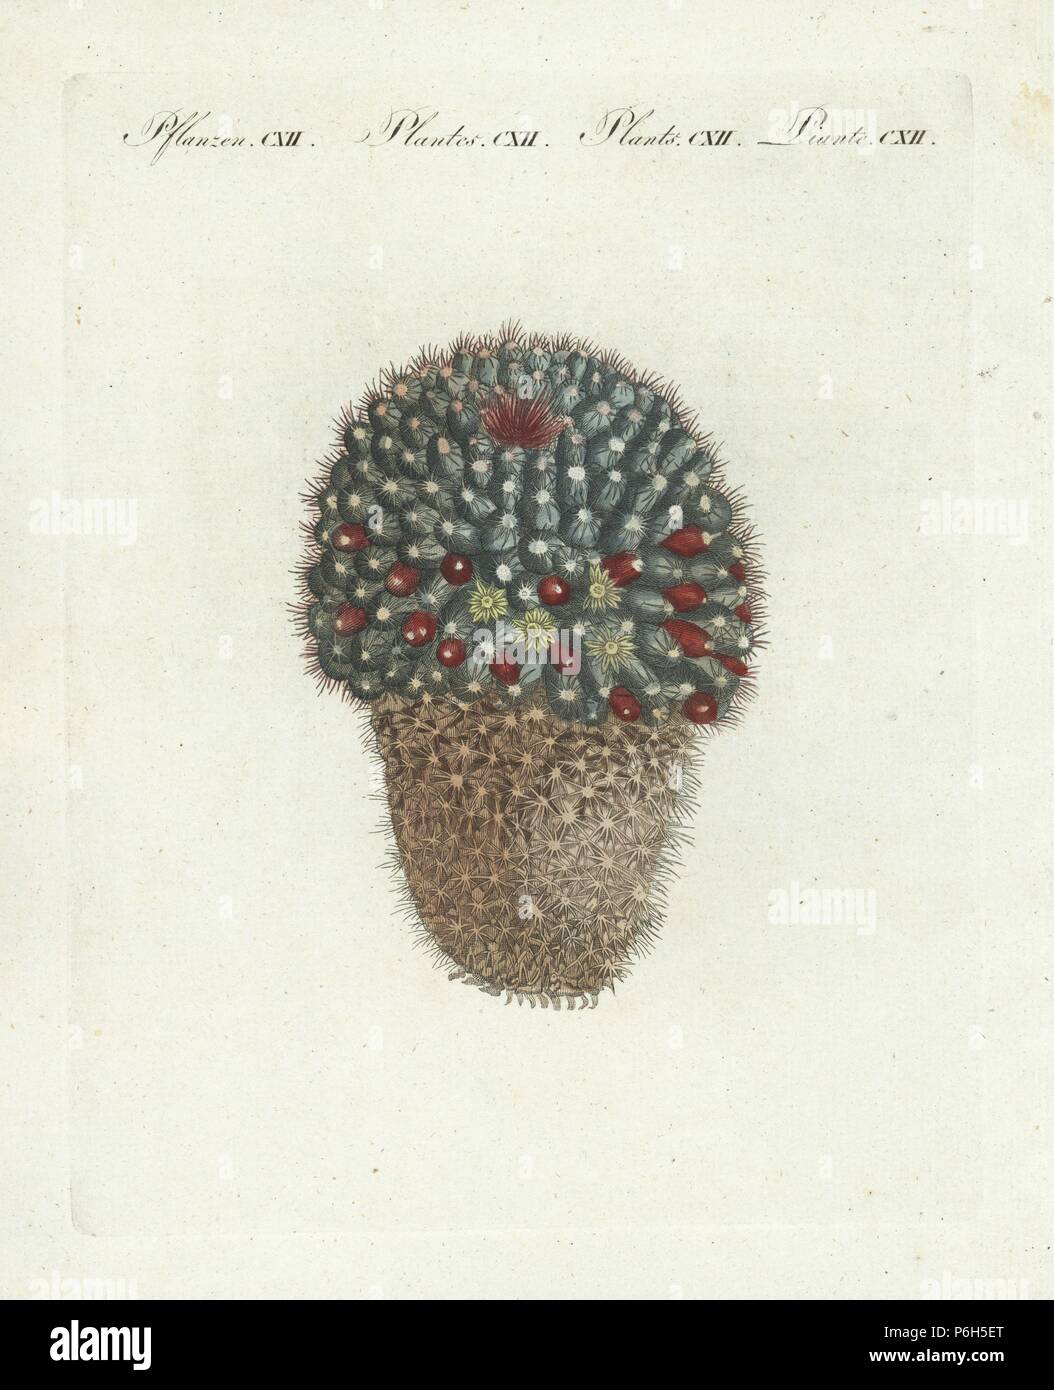 Woolly nipple cactus, Mammillaria mammillaris (Cactus mamillaris). Taken from a plate by Candolle and Redoute 'Plantarum Historia Succulentarum.' Handcoloured copperplate engraving from Bertuch's 'Bilderbuch fur Kinder' (Picture Book for Children), Weimar, 1807. Friedrich Johann Bertuch (1747-1822) was a German publisher and man of arts most famous for his 12-volume encyclopedia for children illustrated with 1,200 engraved plates on natural history, science, costume, mythology, etc., published from 1790-1830. Stock Photo